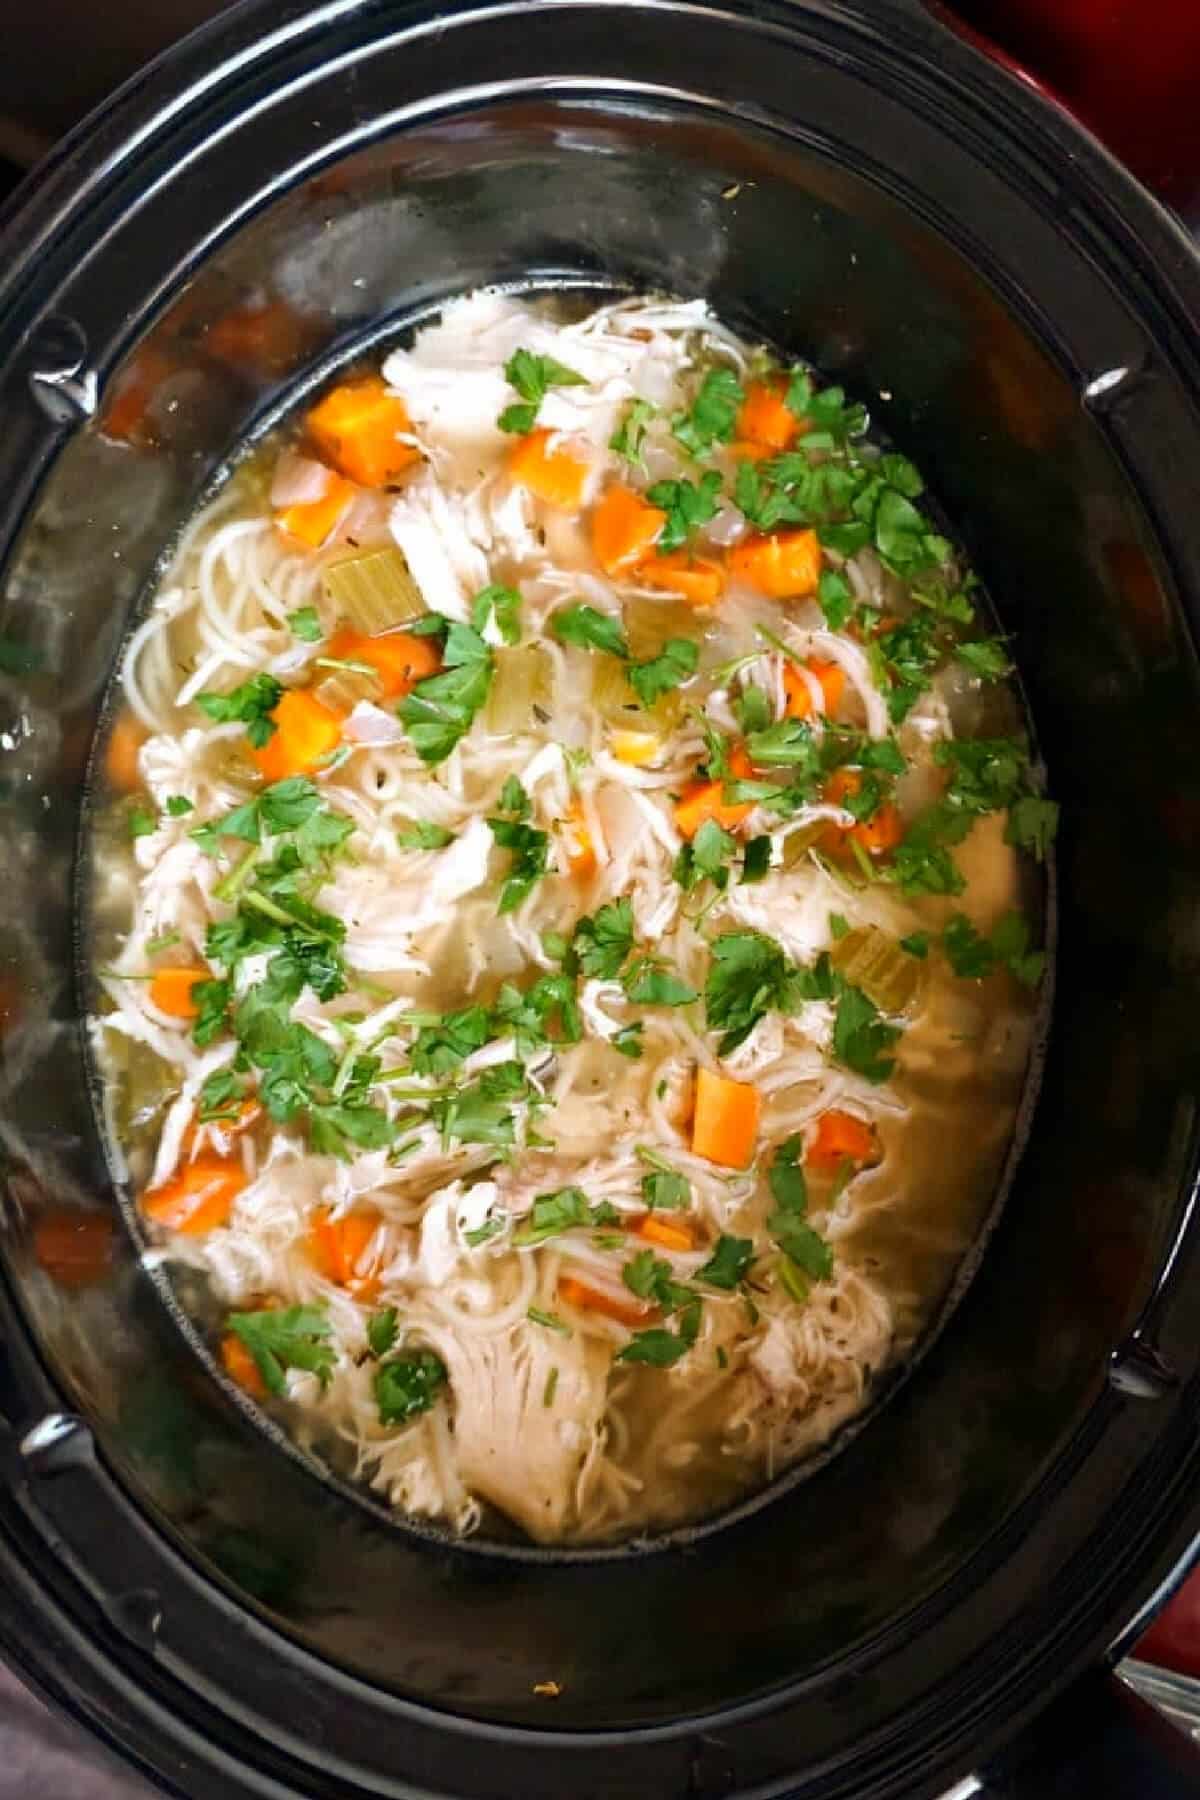 A crockpot with chicken and noodle soup.